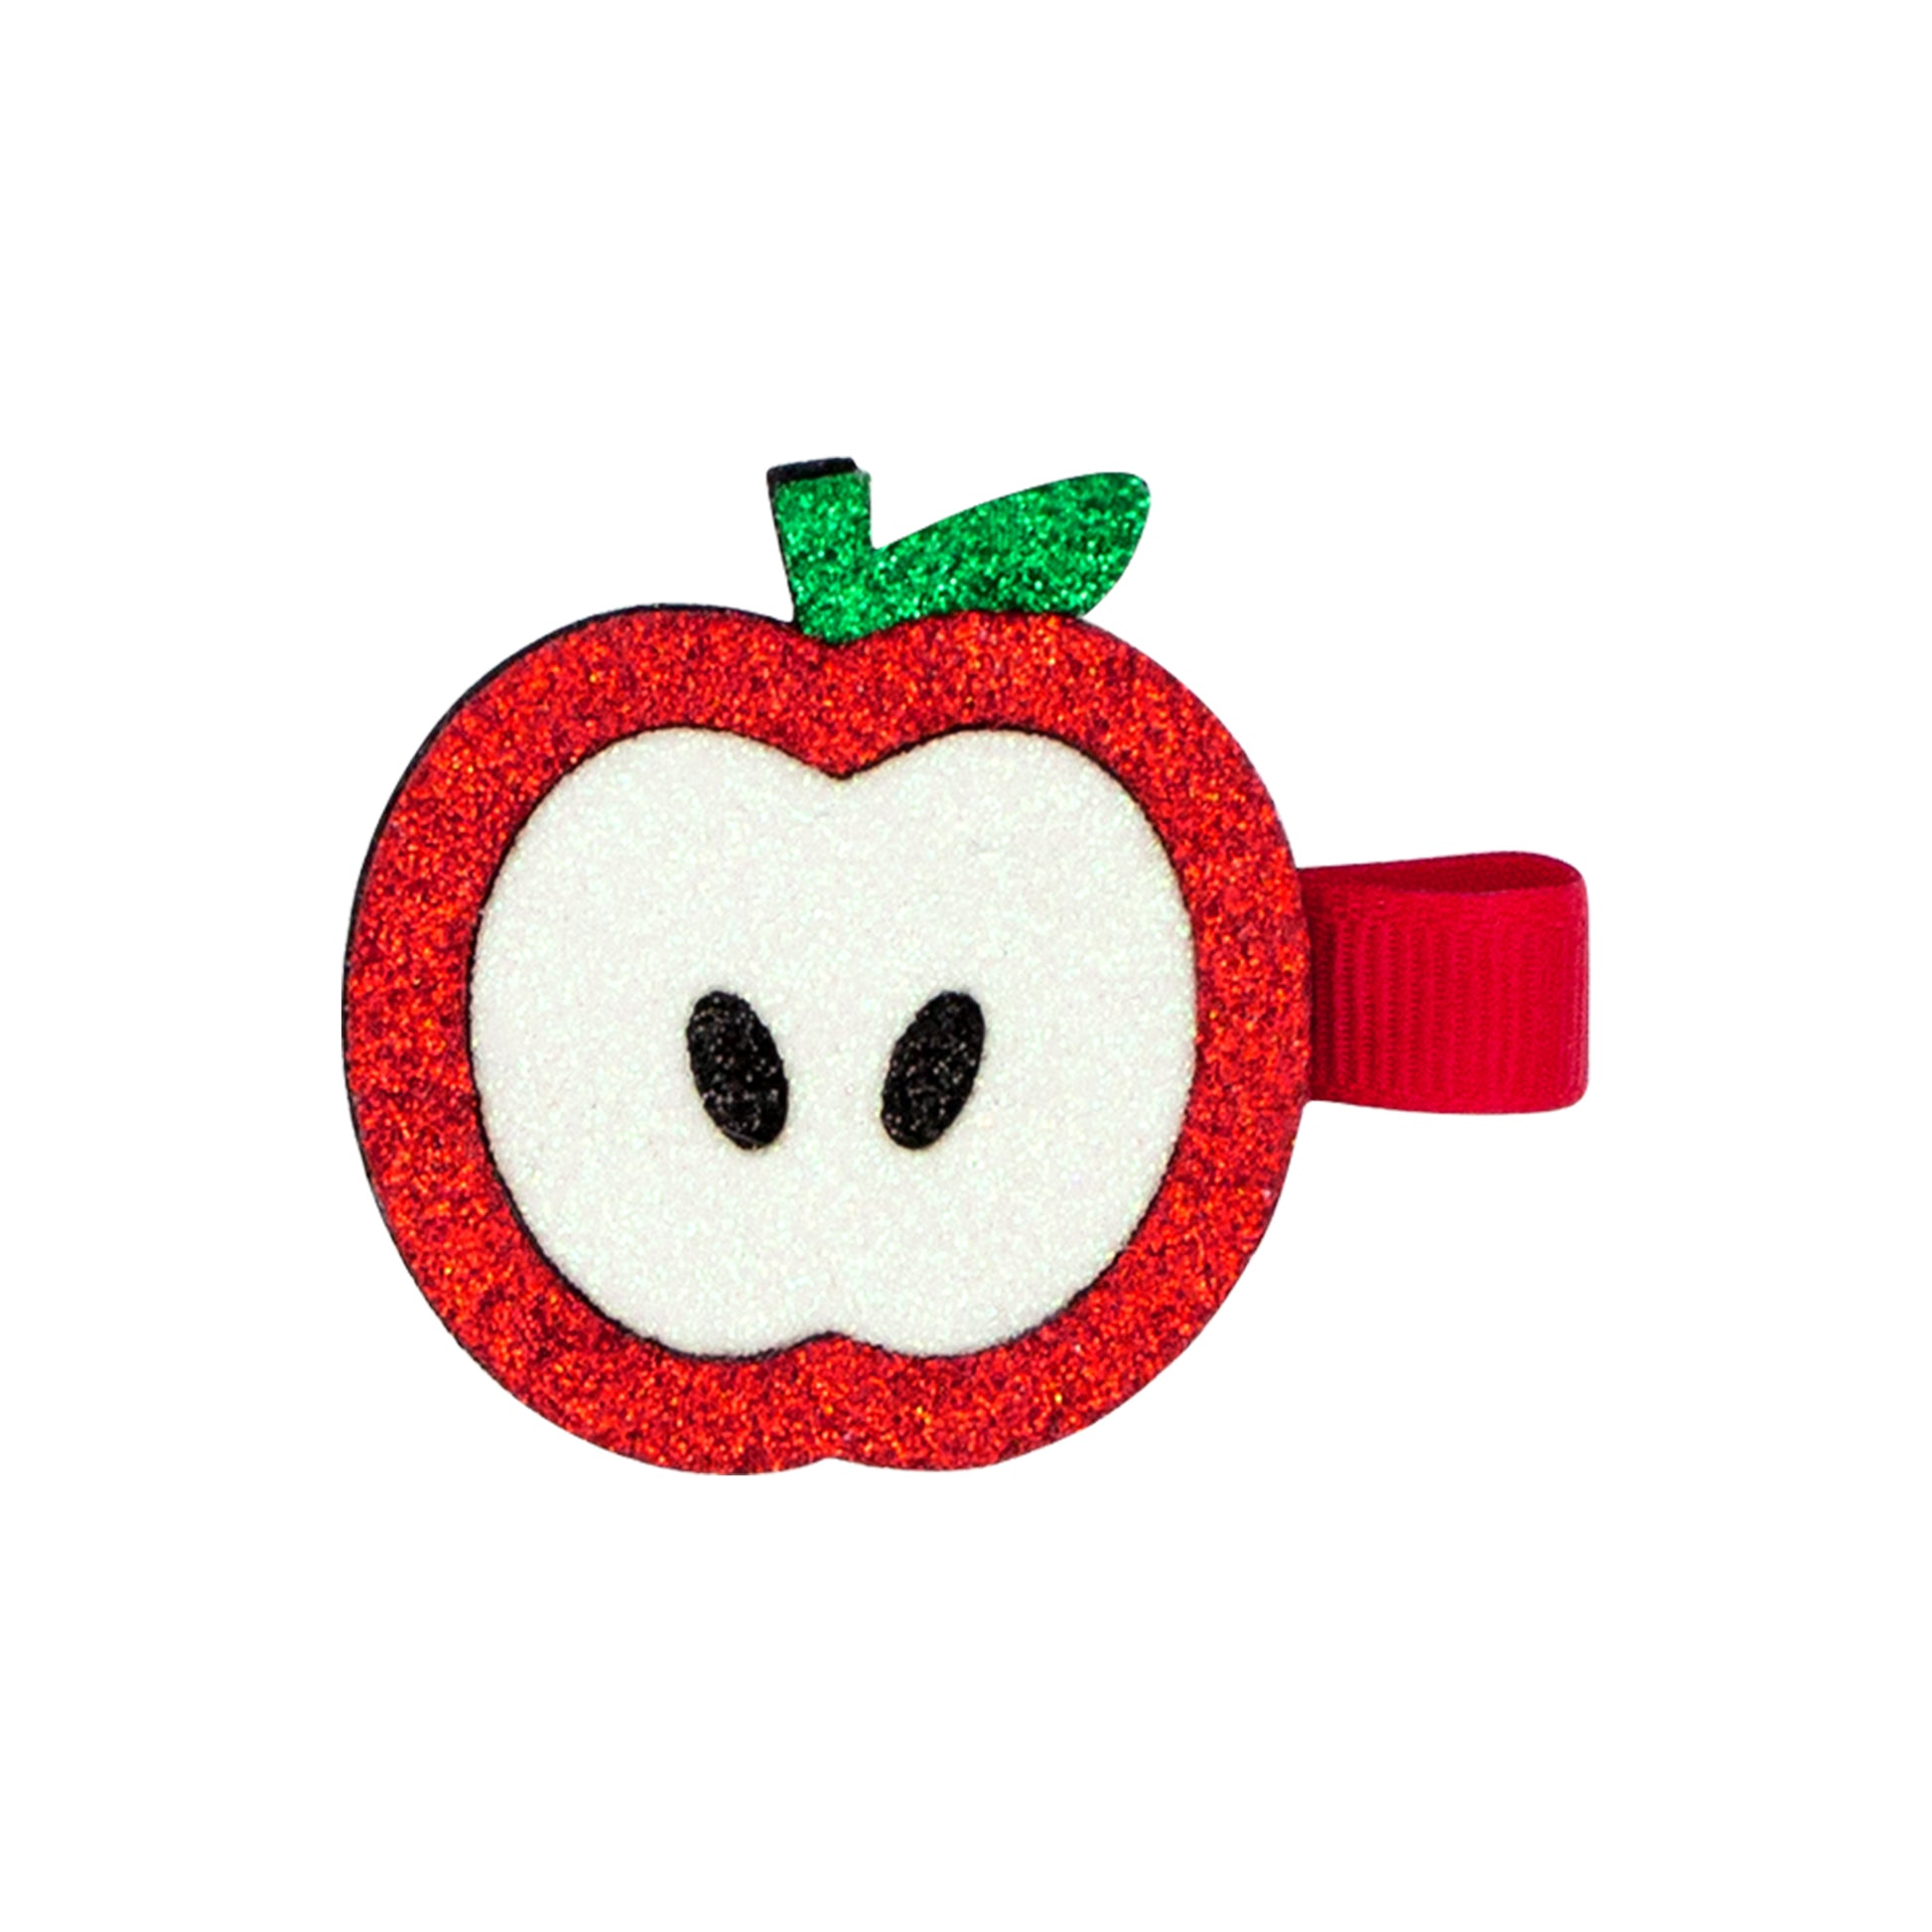 Wee Ones Layered Glitter School Hair Clip - Apple